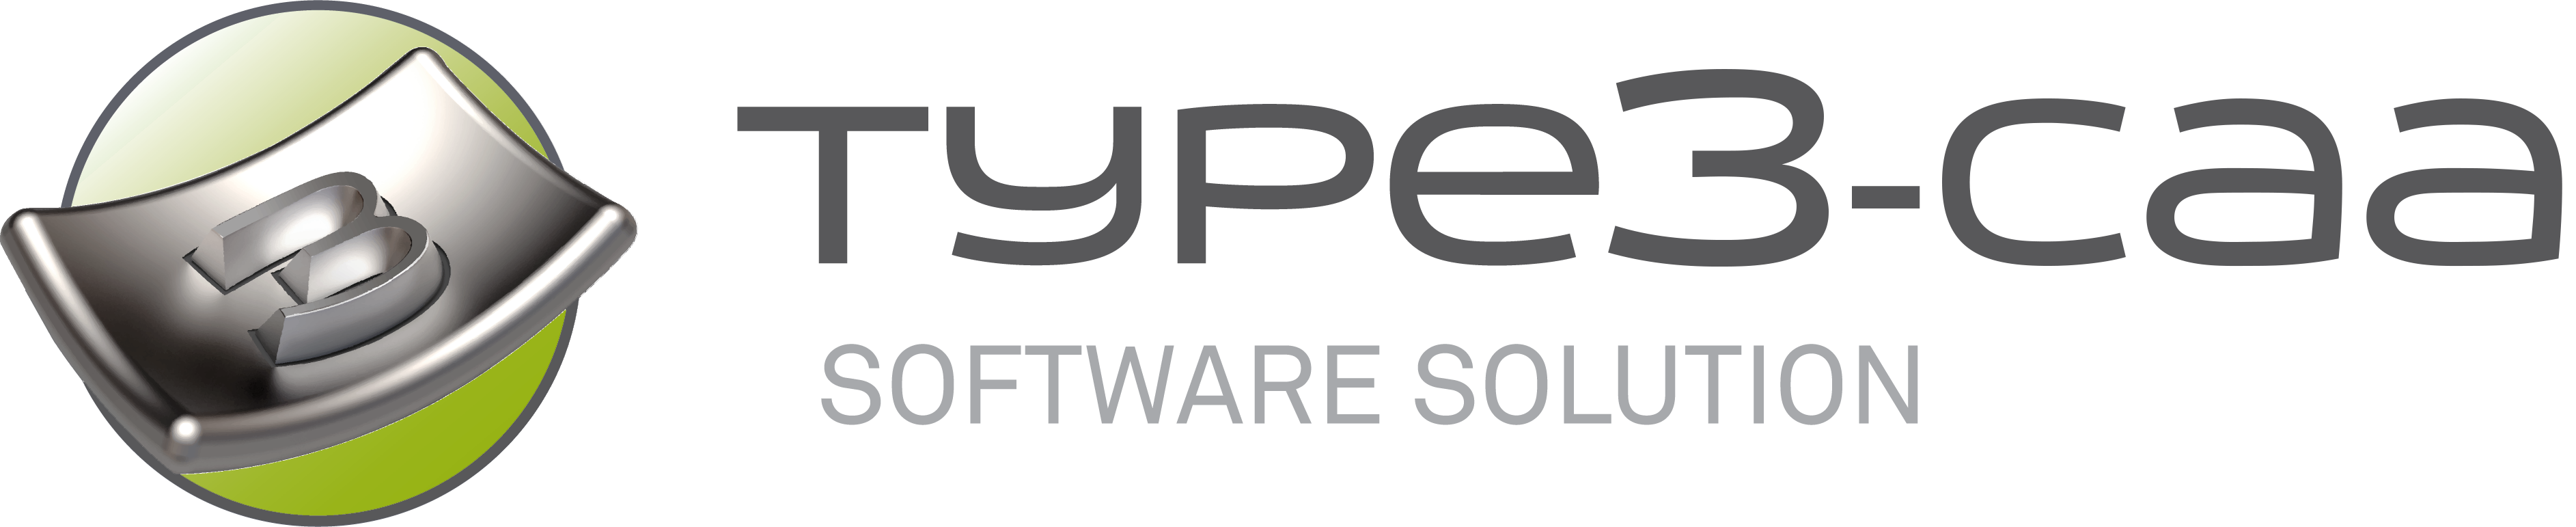 Type3 Software Solutions - Artistic & Industrial CAD/CAM Solutions